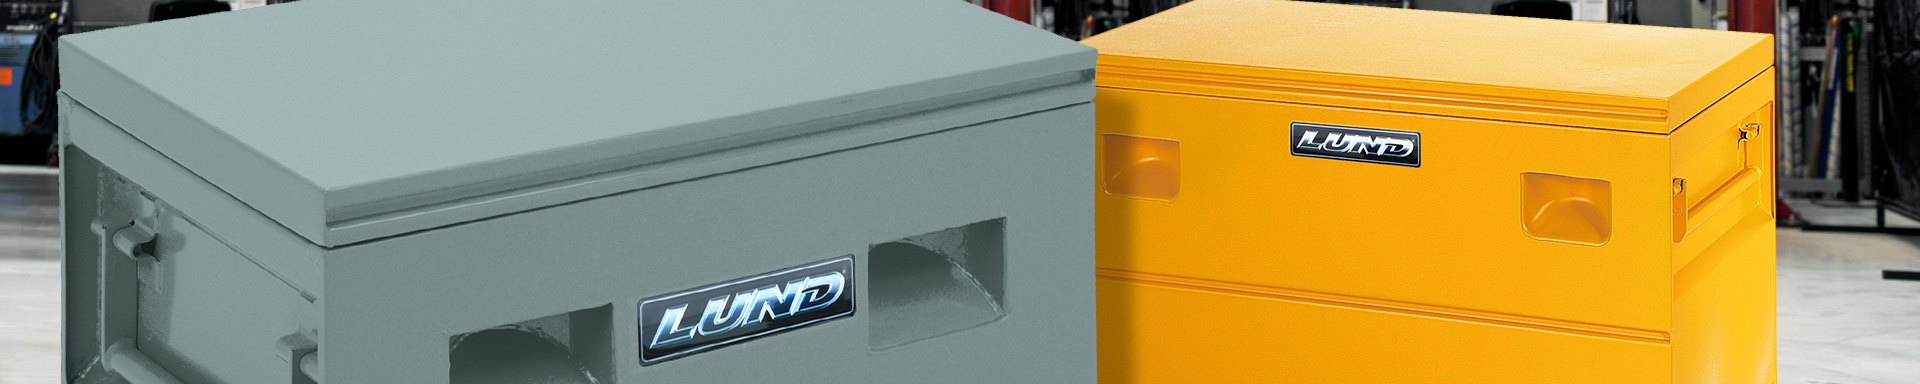 Lund Portable Tool Boxes & Totes